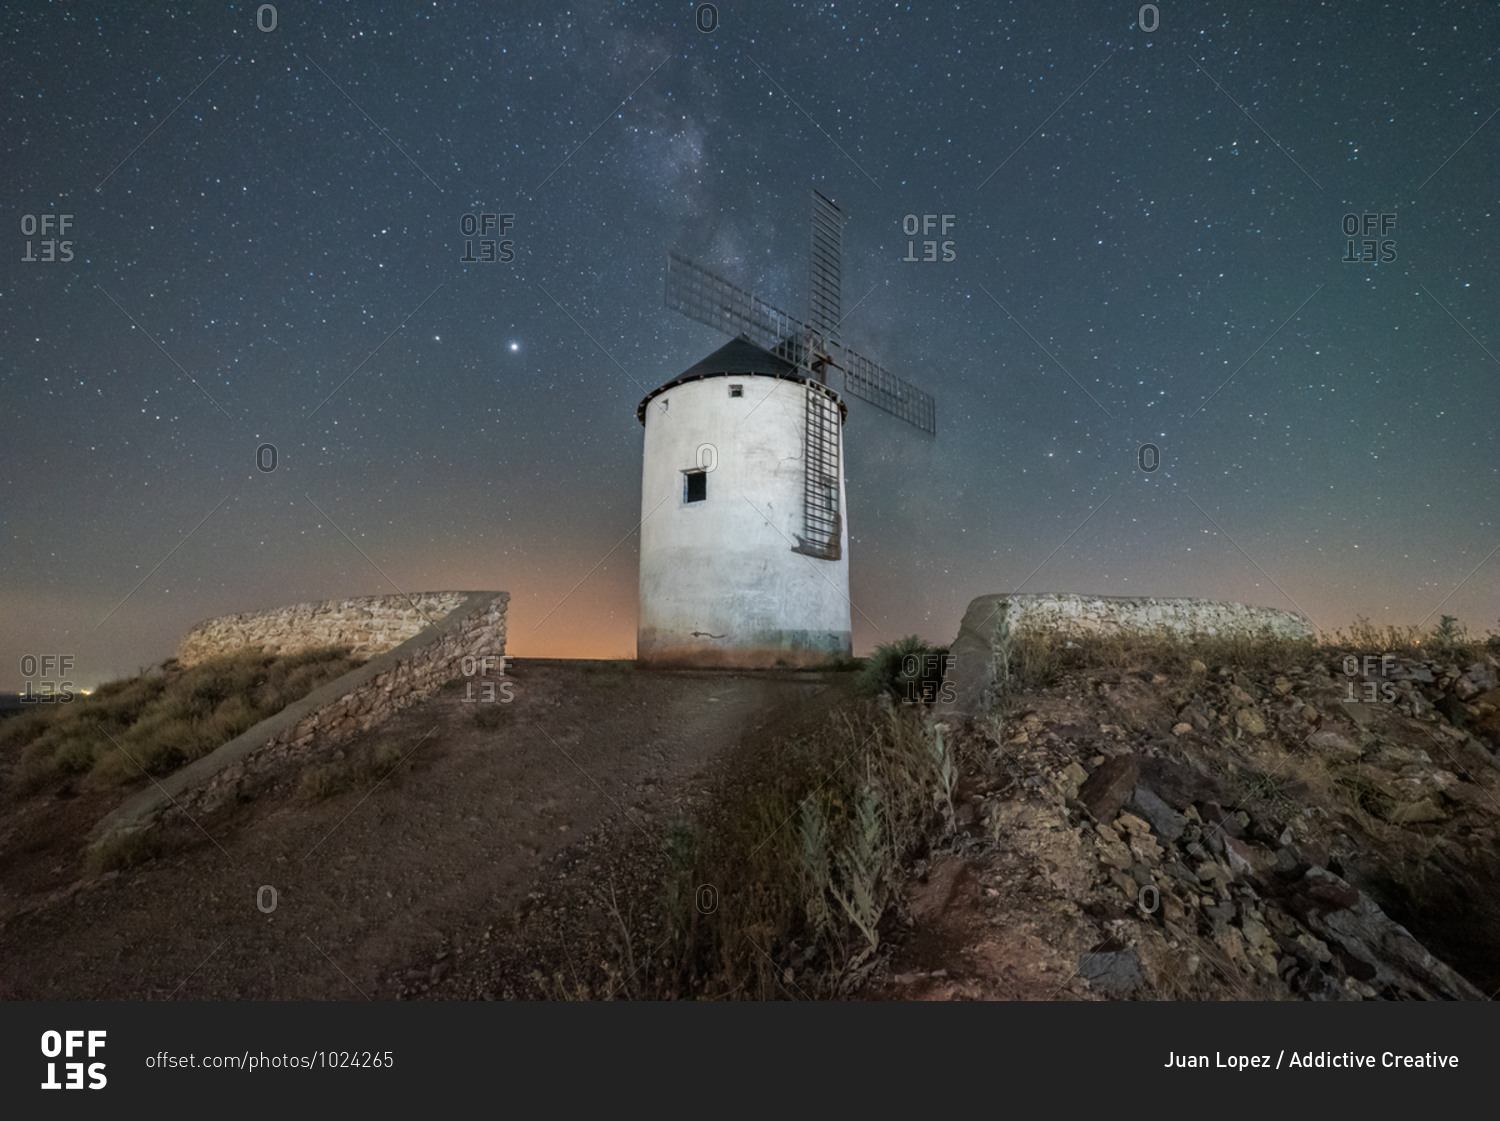 Low angle of old white windmill tower located on hill against starry night sky with Milky Way